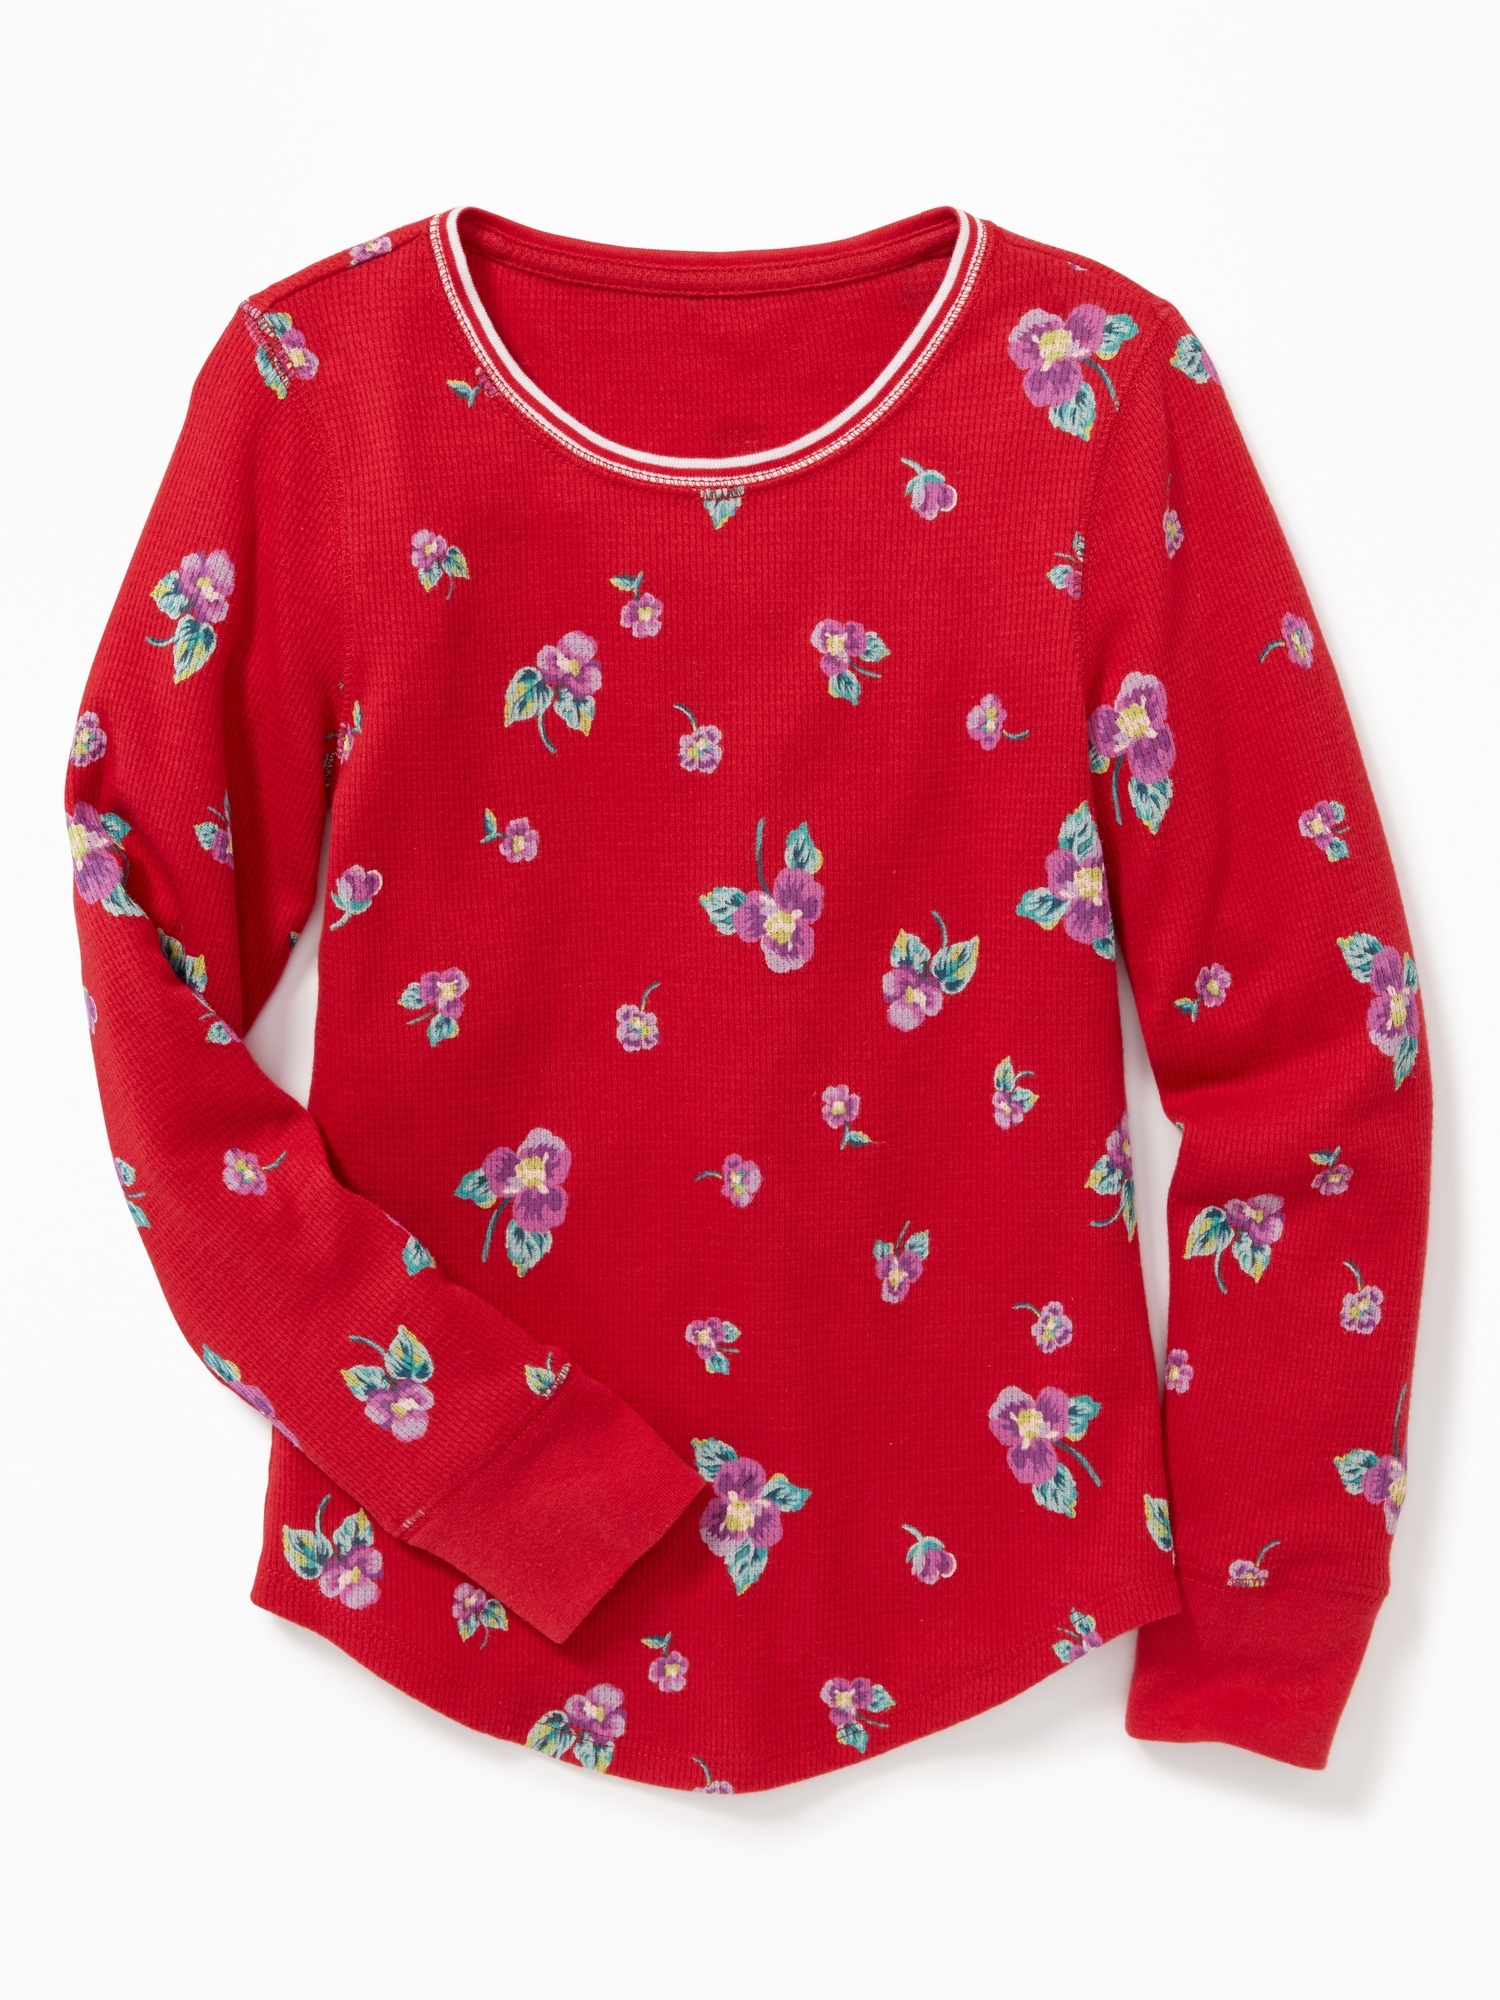 Long & Lean Thermal Tee for Girls | Old Navy